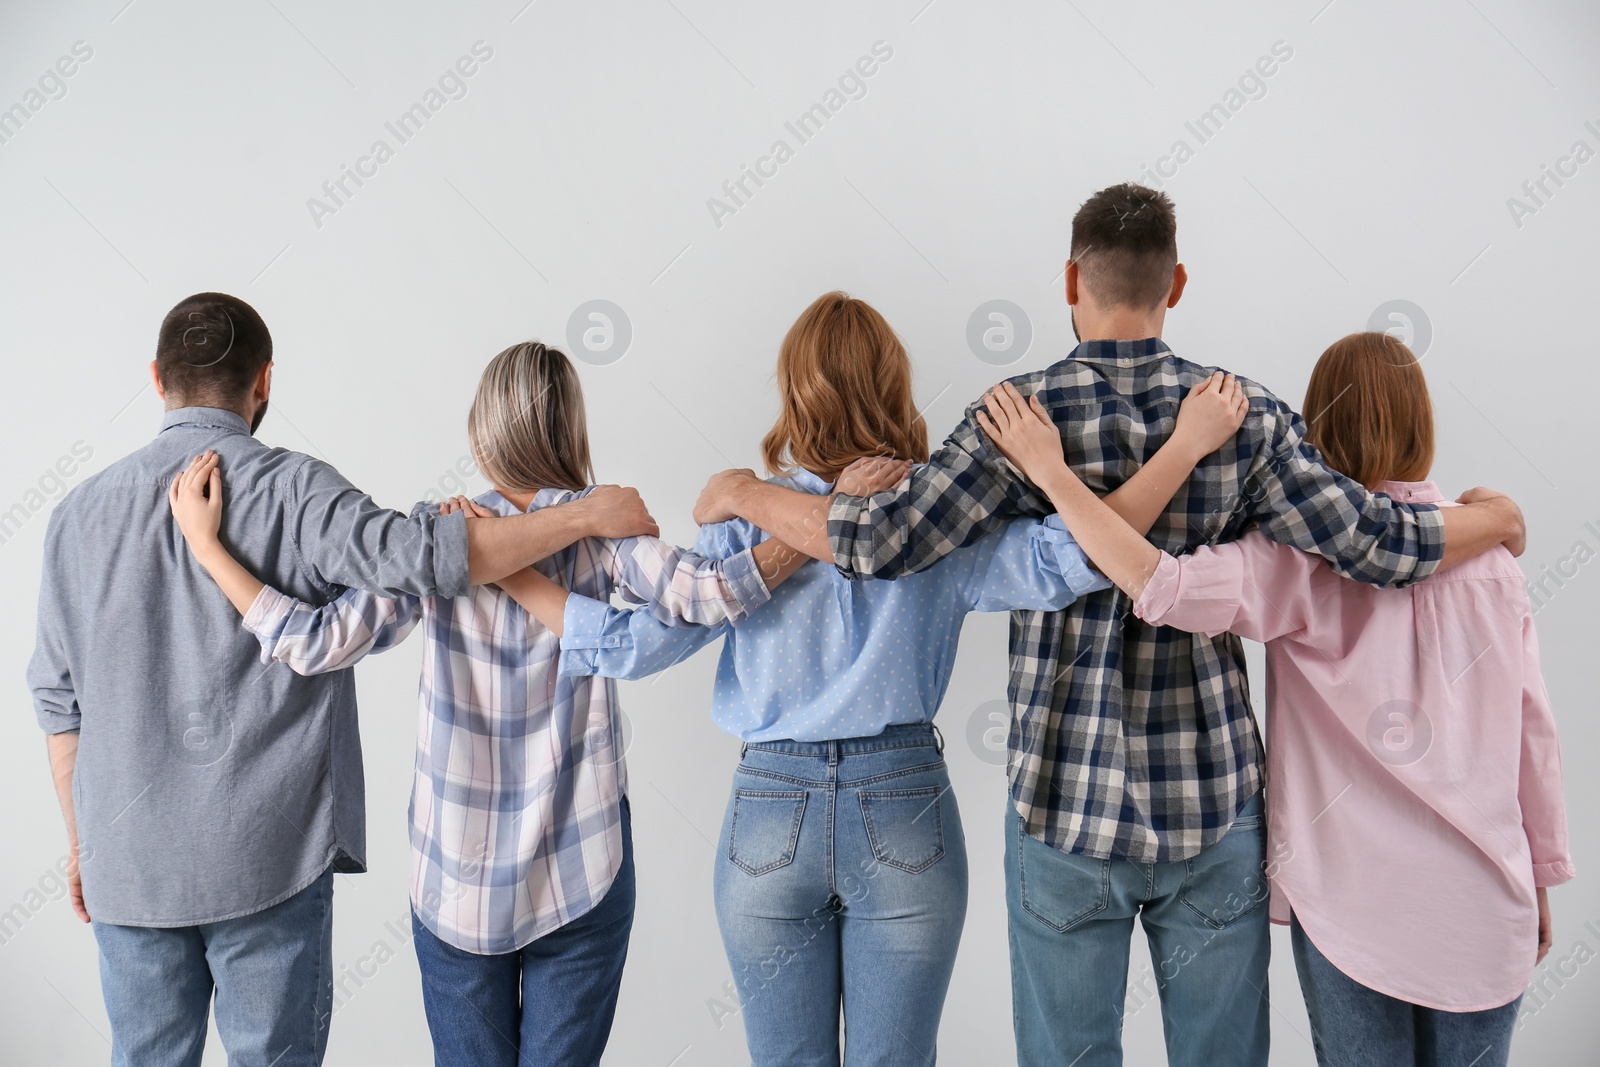 Photo of People hugging together on grey background, back view